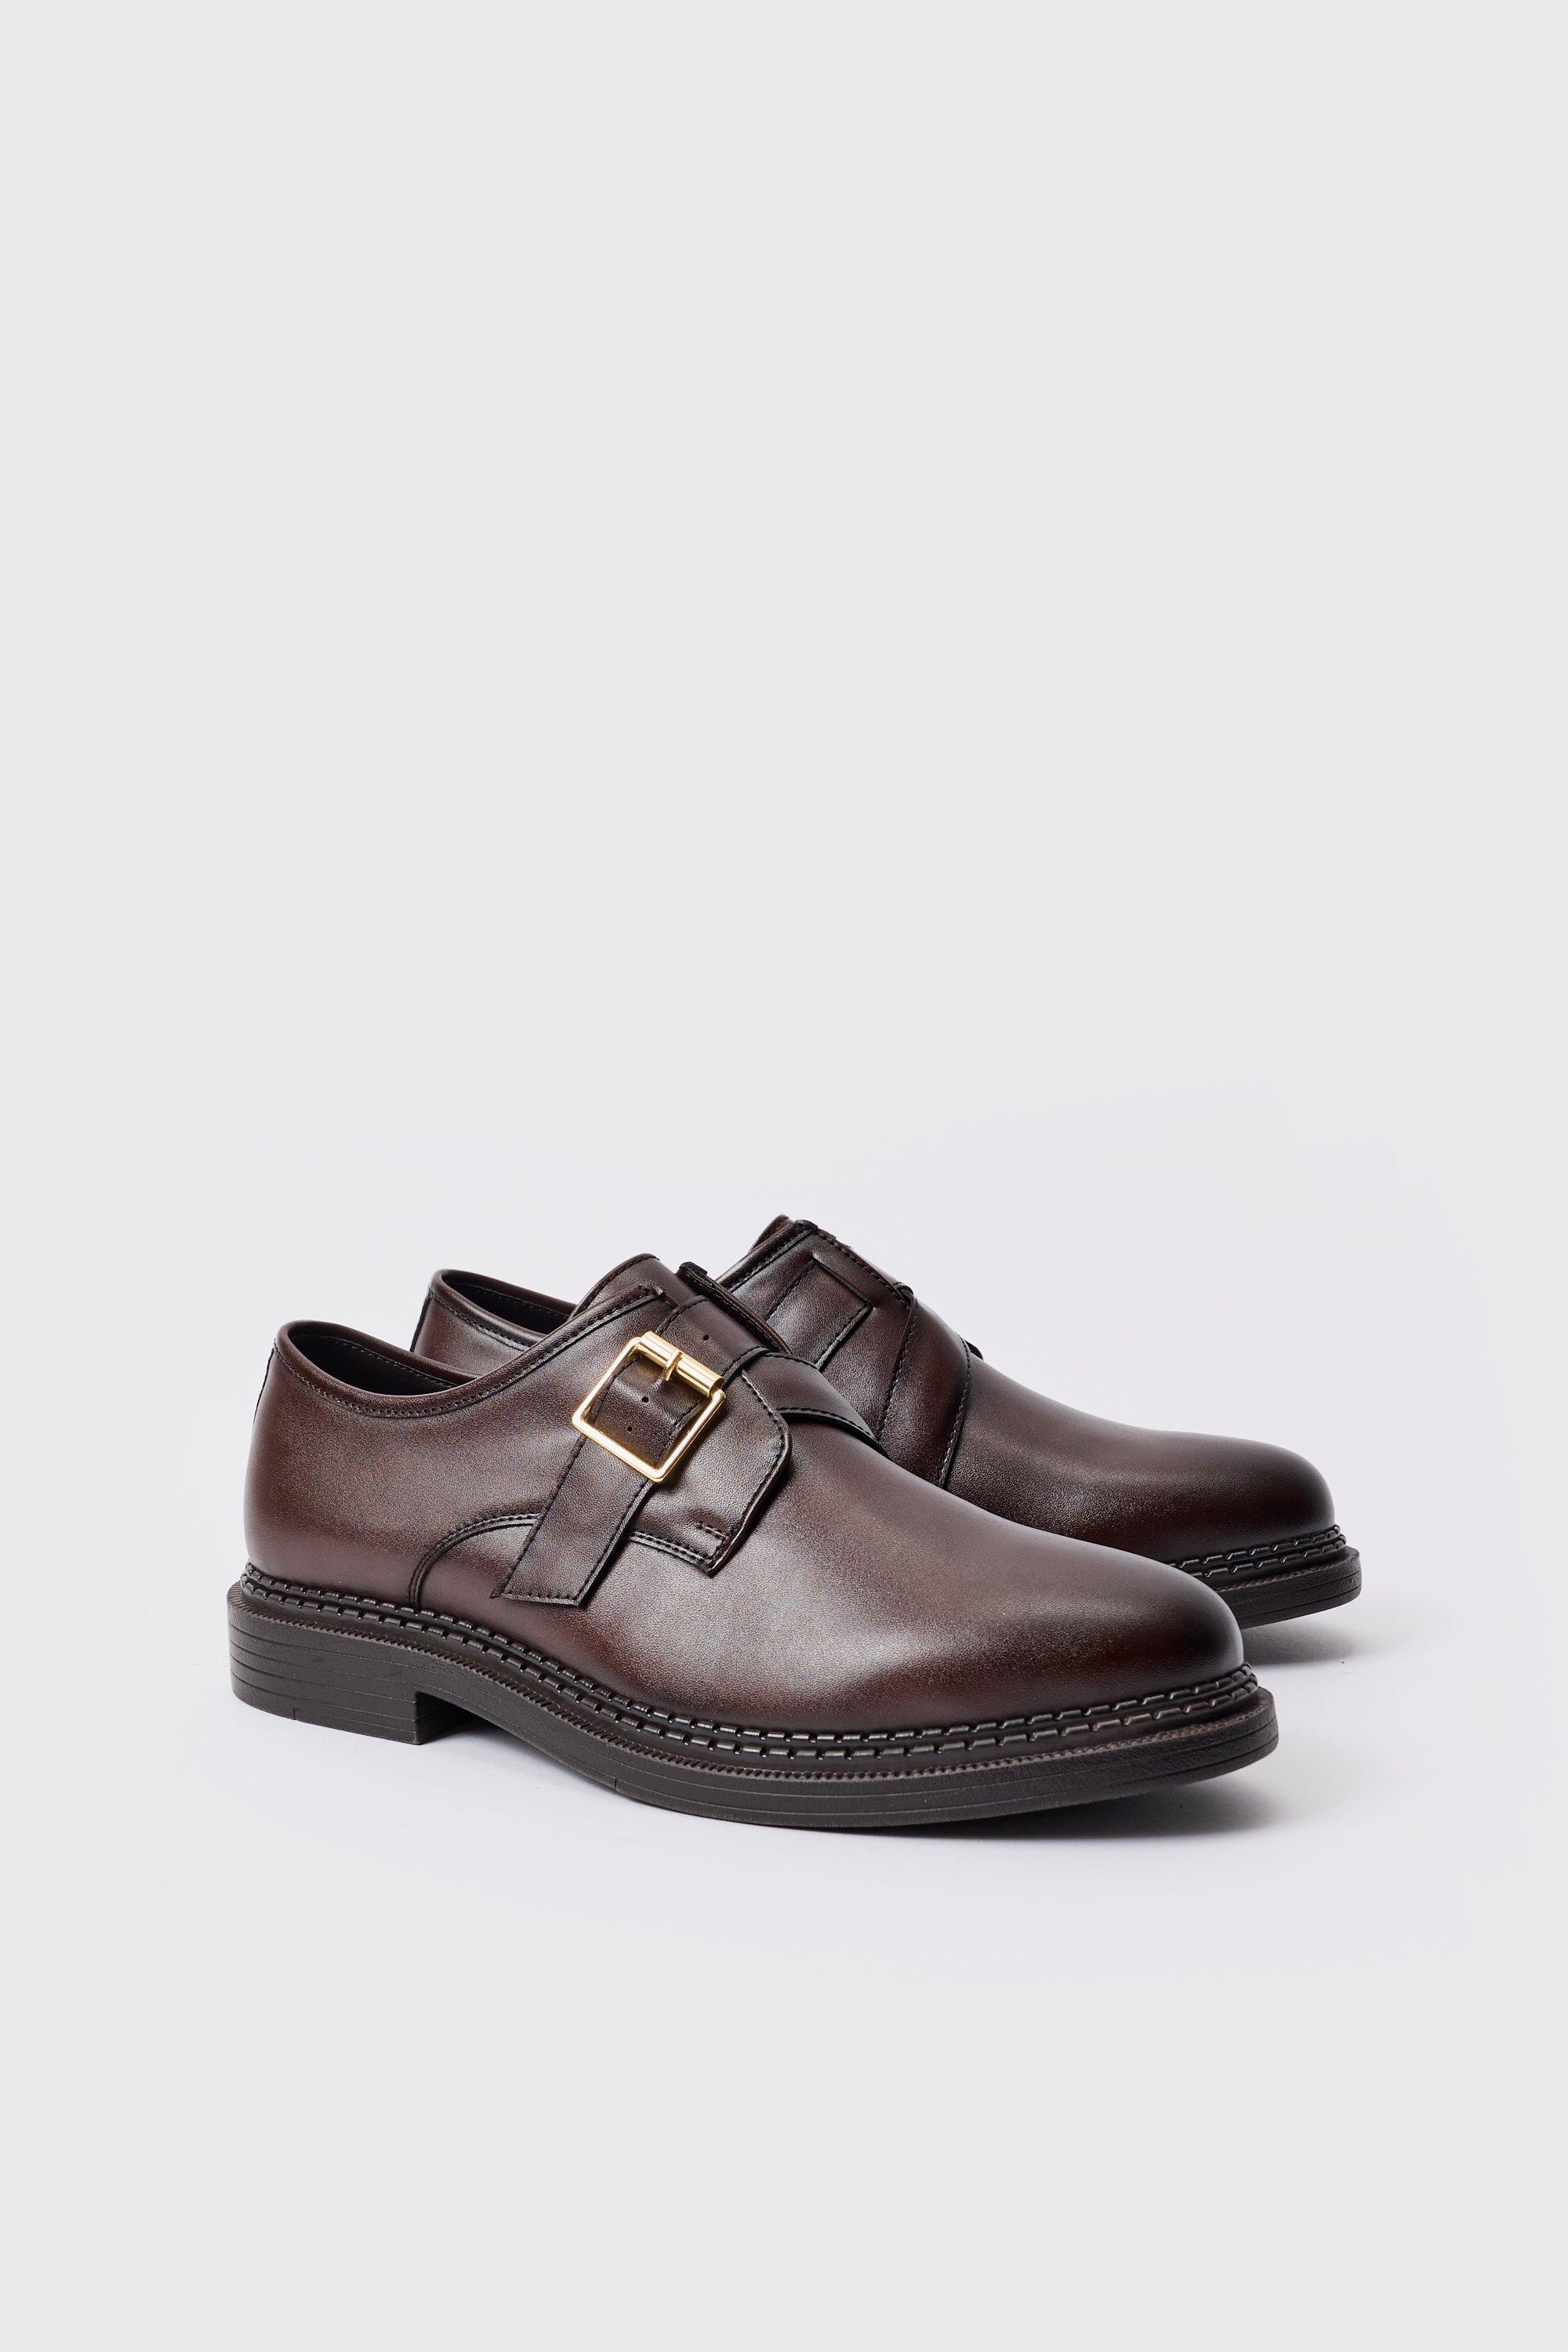 Image of Pu Cross Over Strap Detail Loafer In Dark Brown, Brown